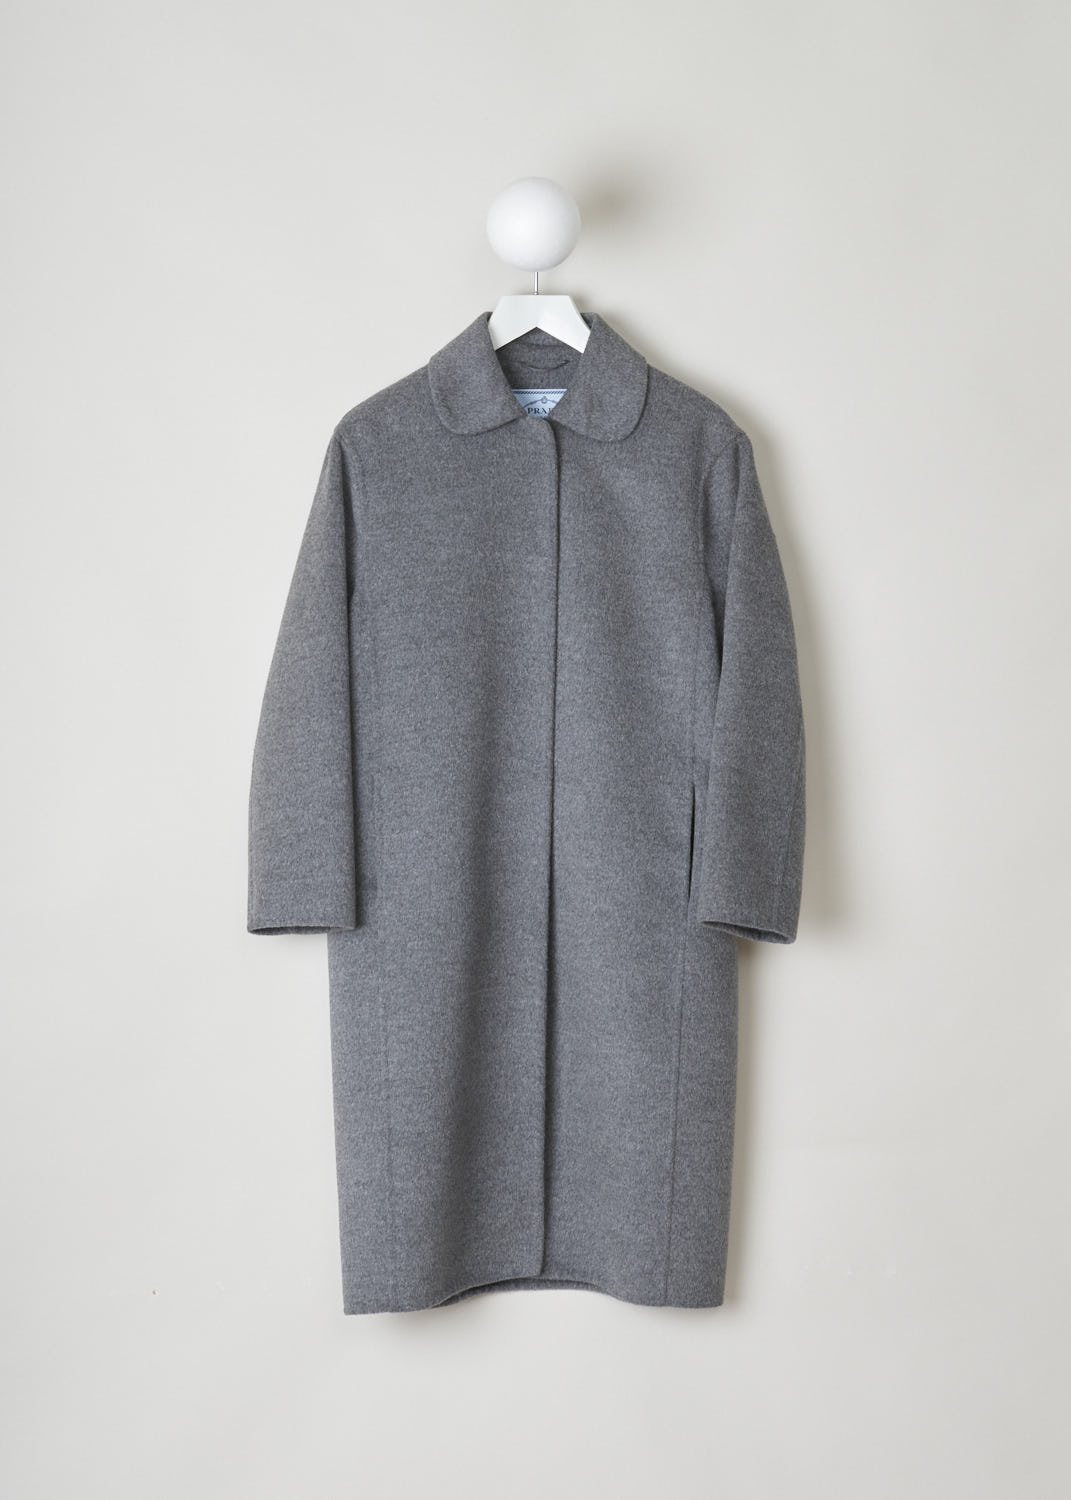 PRADA, GREY WOOL COAT WITH CLAUDINE COLLAR, P650E_03H_Cashgora_Double_F0031_Grigio, Grey, Front, This grey wool-blend coat has a Claudine collar and a concealed press-button closure. Concealed slanted pockets can also be found on the front of the coat. In the back, the coat has a pleated yoke and a martingale.
